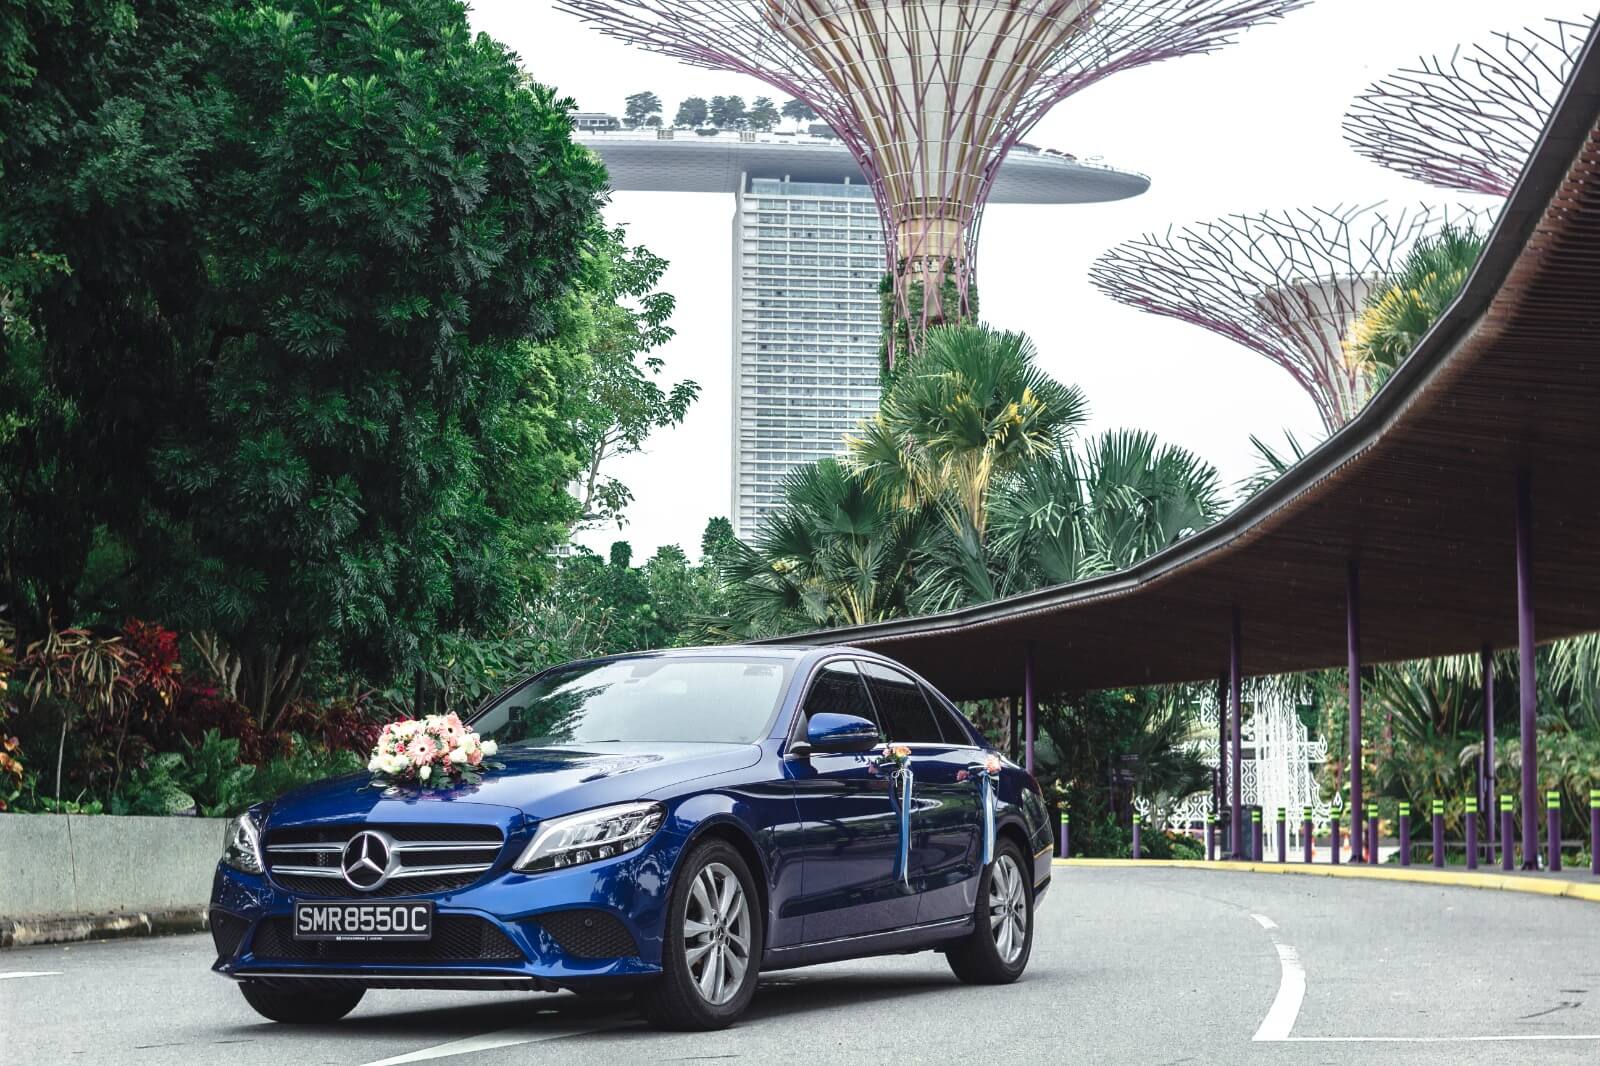 Top 6 Cars to Rent this Wedding Season